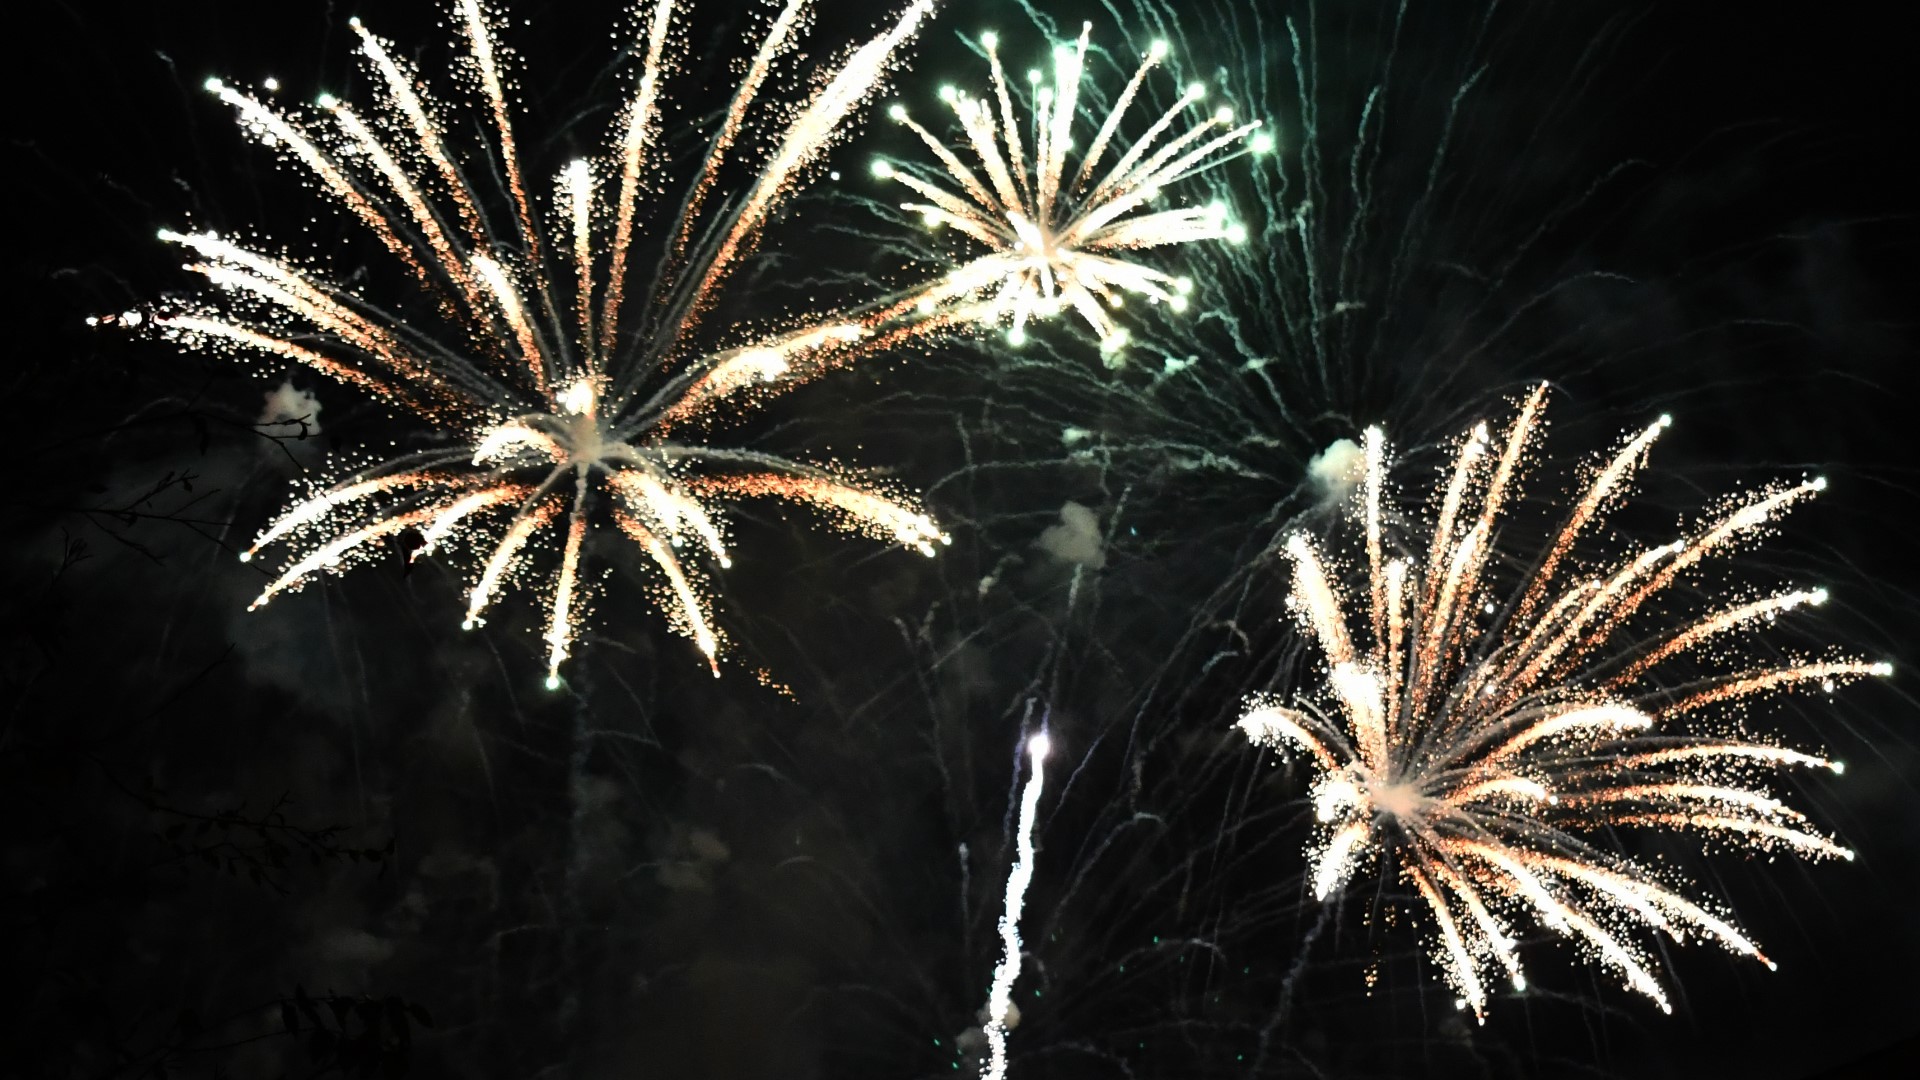 Fireworks are used every year as a form of celebrating the fourth of July but the loud sounds especially into the night can trigger a mental illness for some.